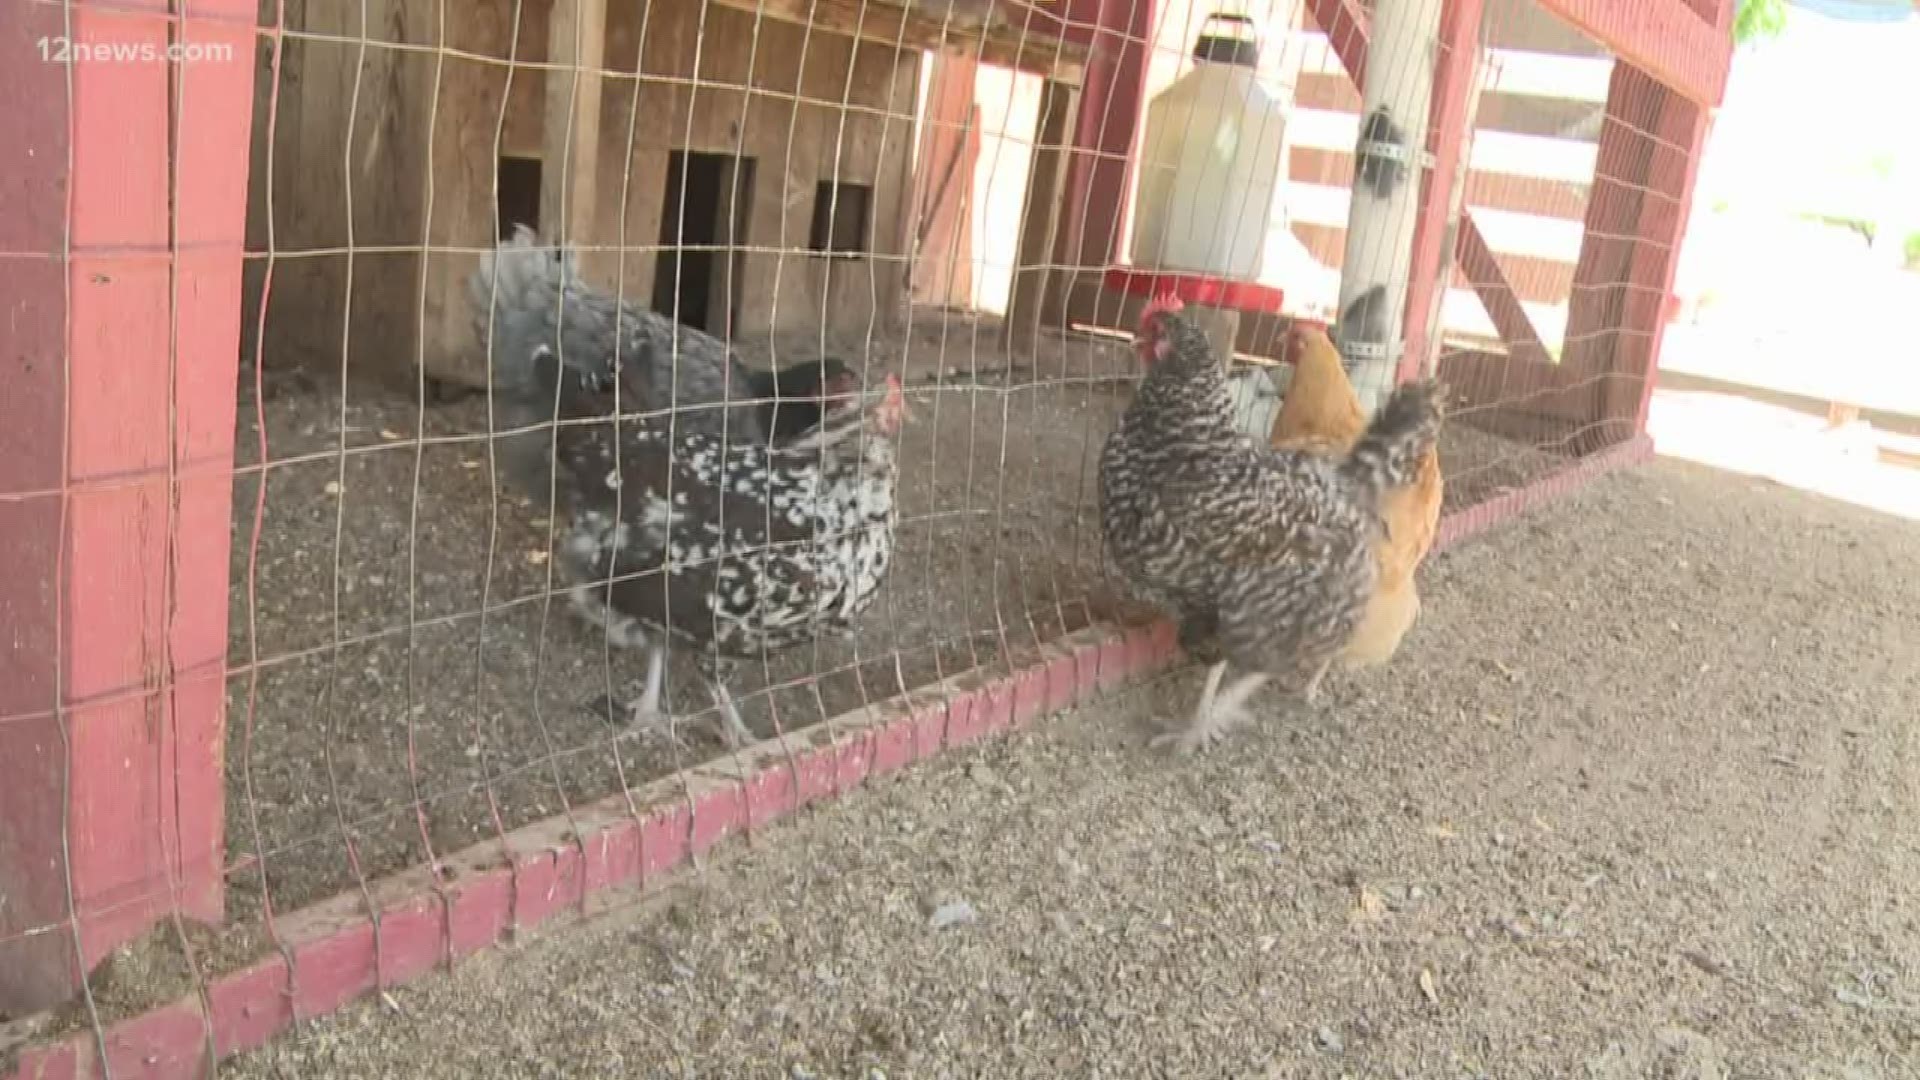 Lots of people are buying chicks to raise chickens for eggs. Here's how to take care of them in the Arizona heat.